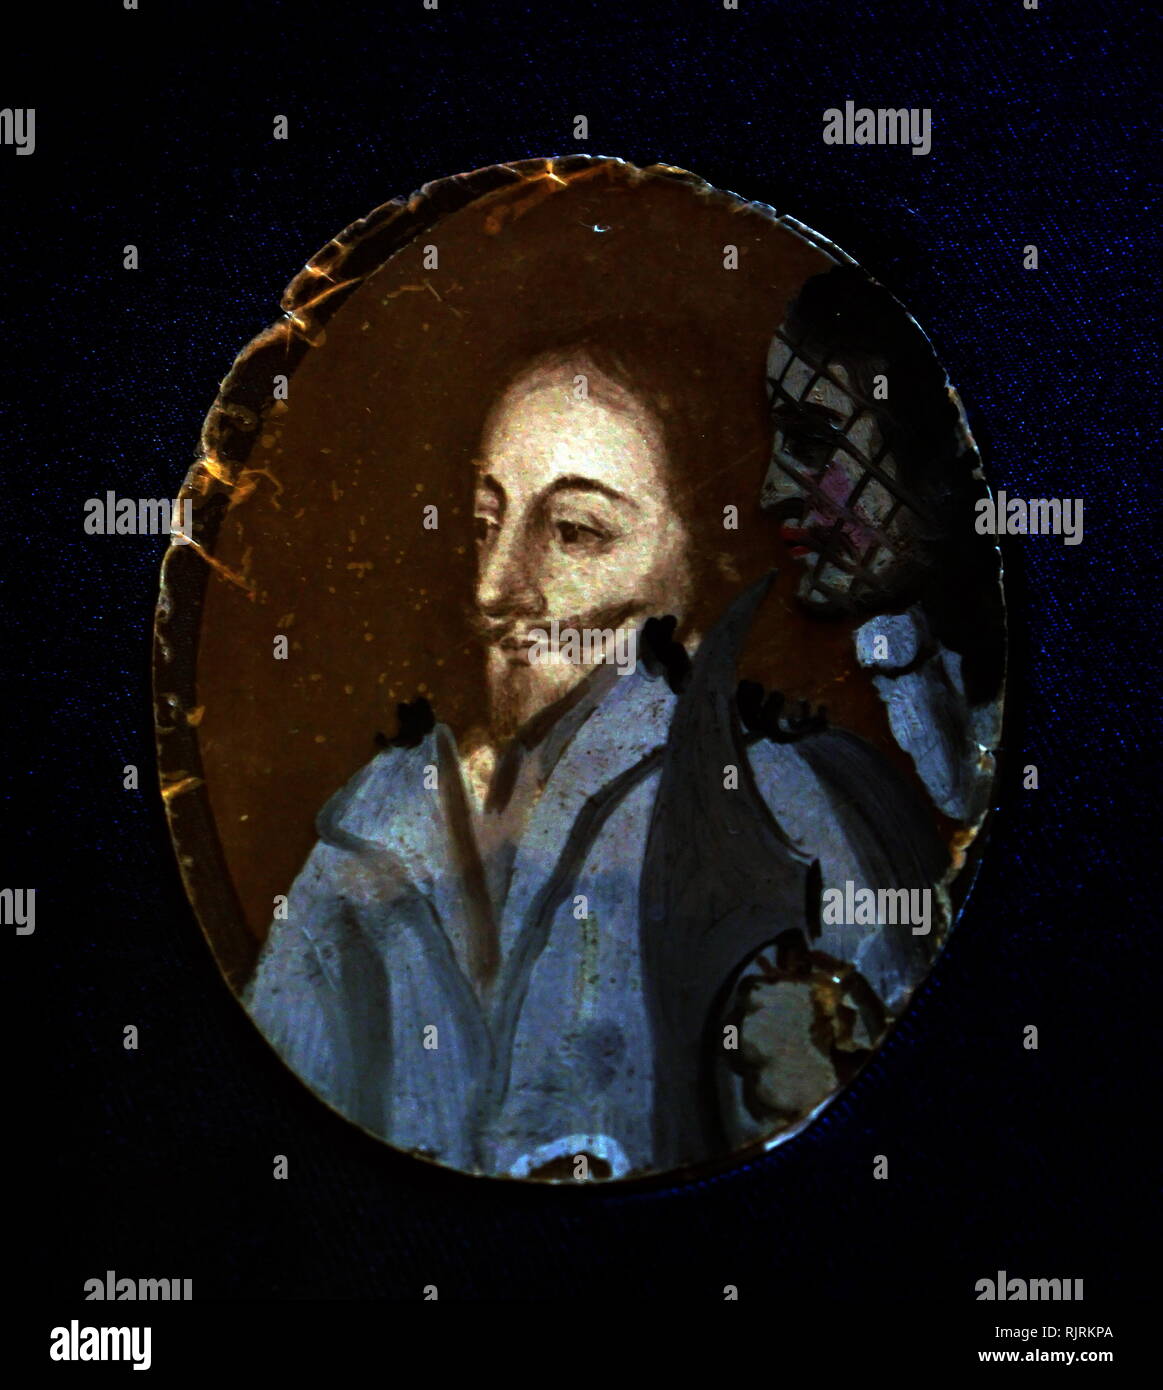 Cameo enamel painted portrait of King Charles I (1600 - 1649). monarch of the three kingdoms of England, Scotland, and Ireland from 27 March 1625 until his execution in 1649. Stock Photo